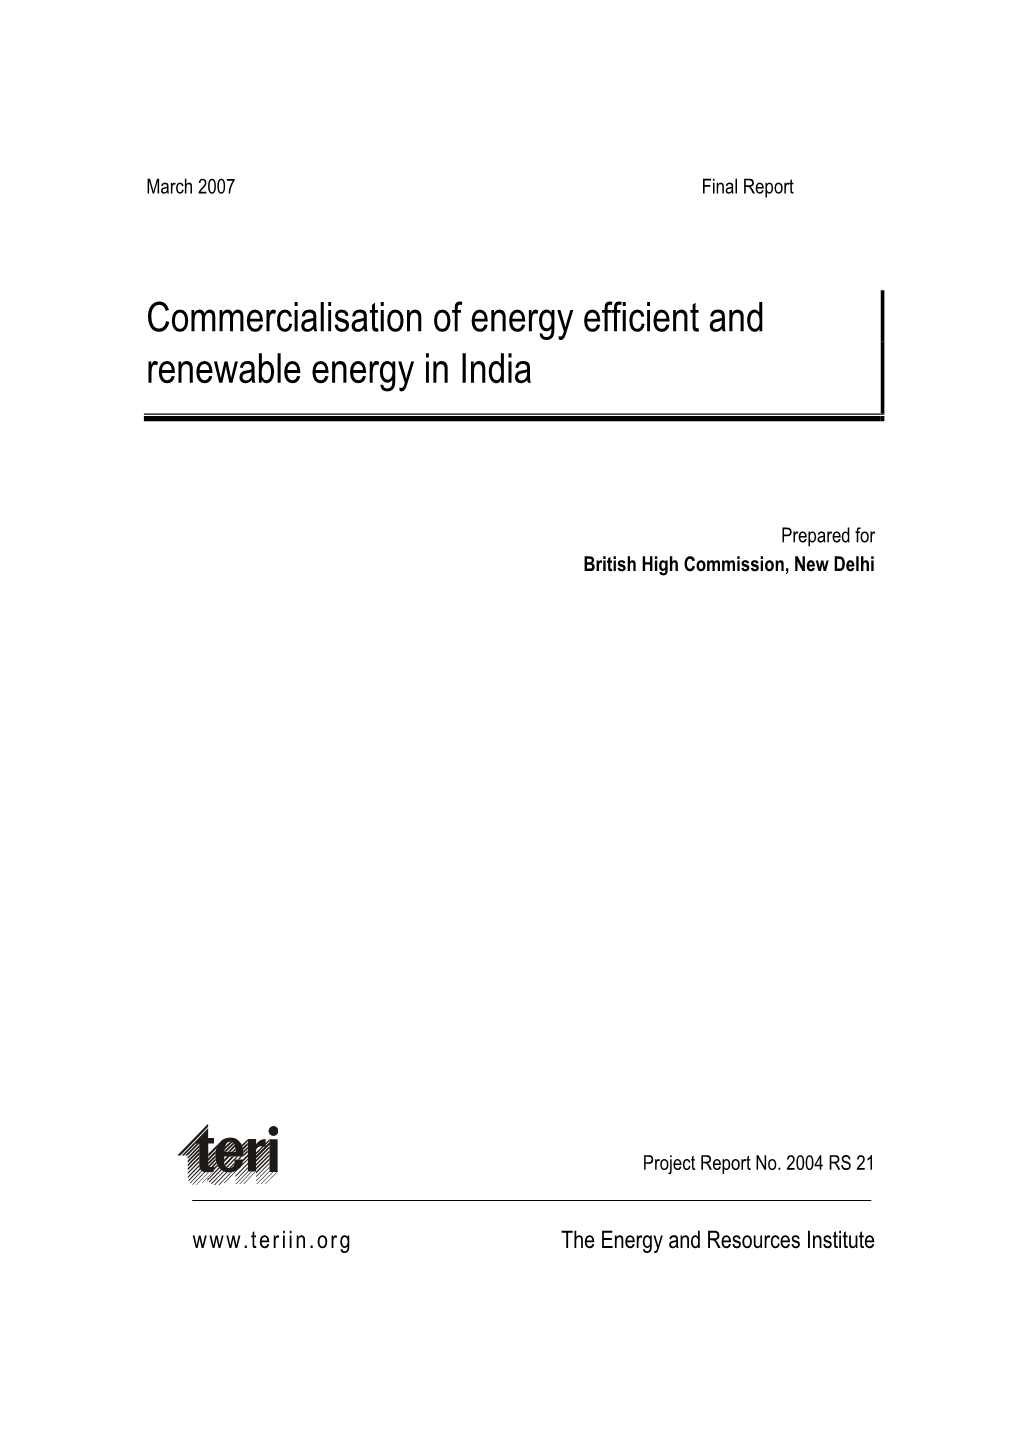 Commercialisation of Energy Efficient and Renewable Energy in India